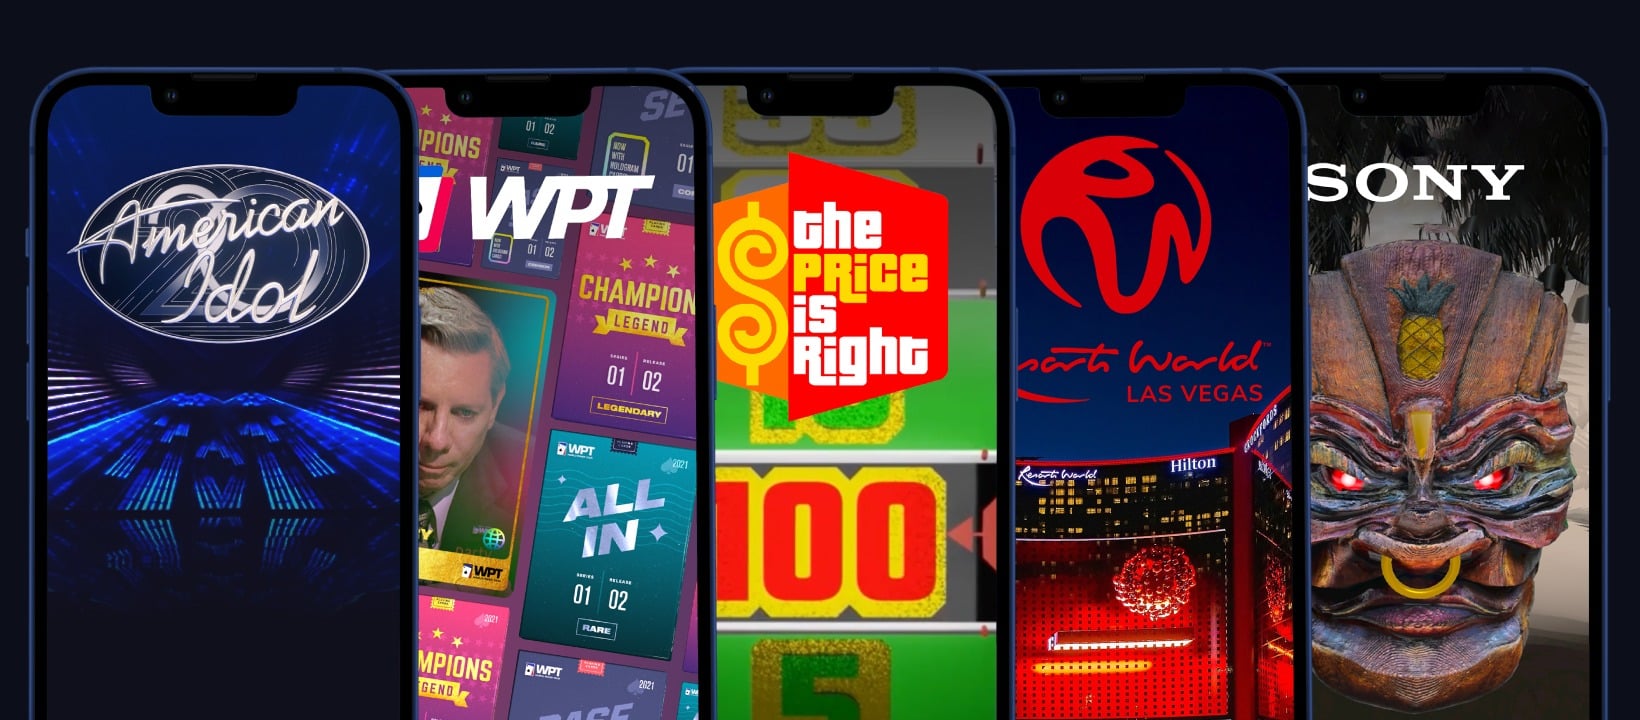 digital poster featuring American Idol, World Poker Tour, The Price is Right via ThetaDrop Marketplace